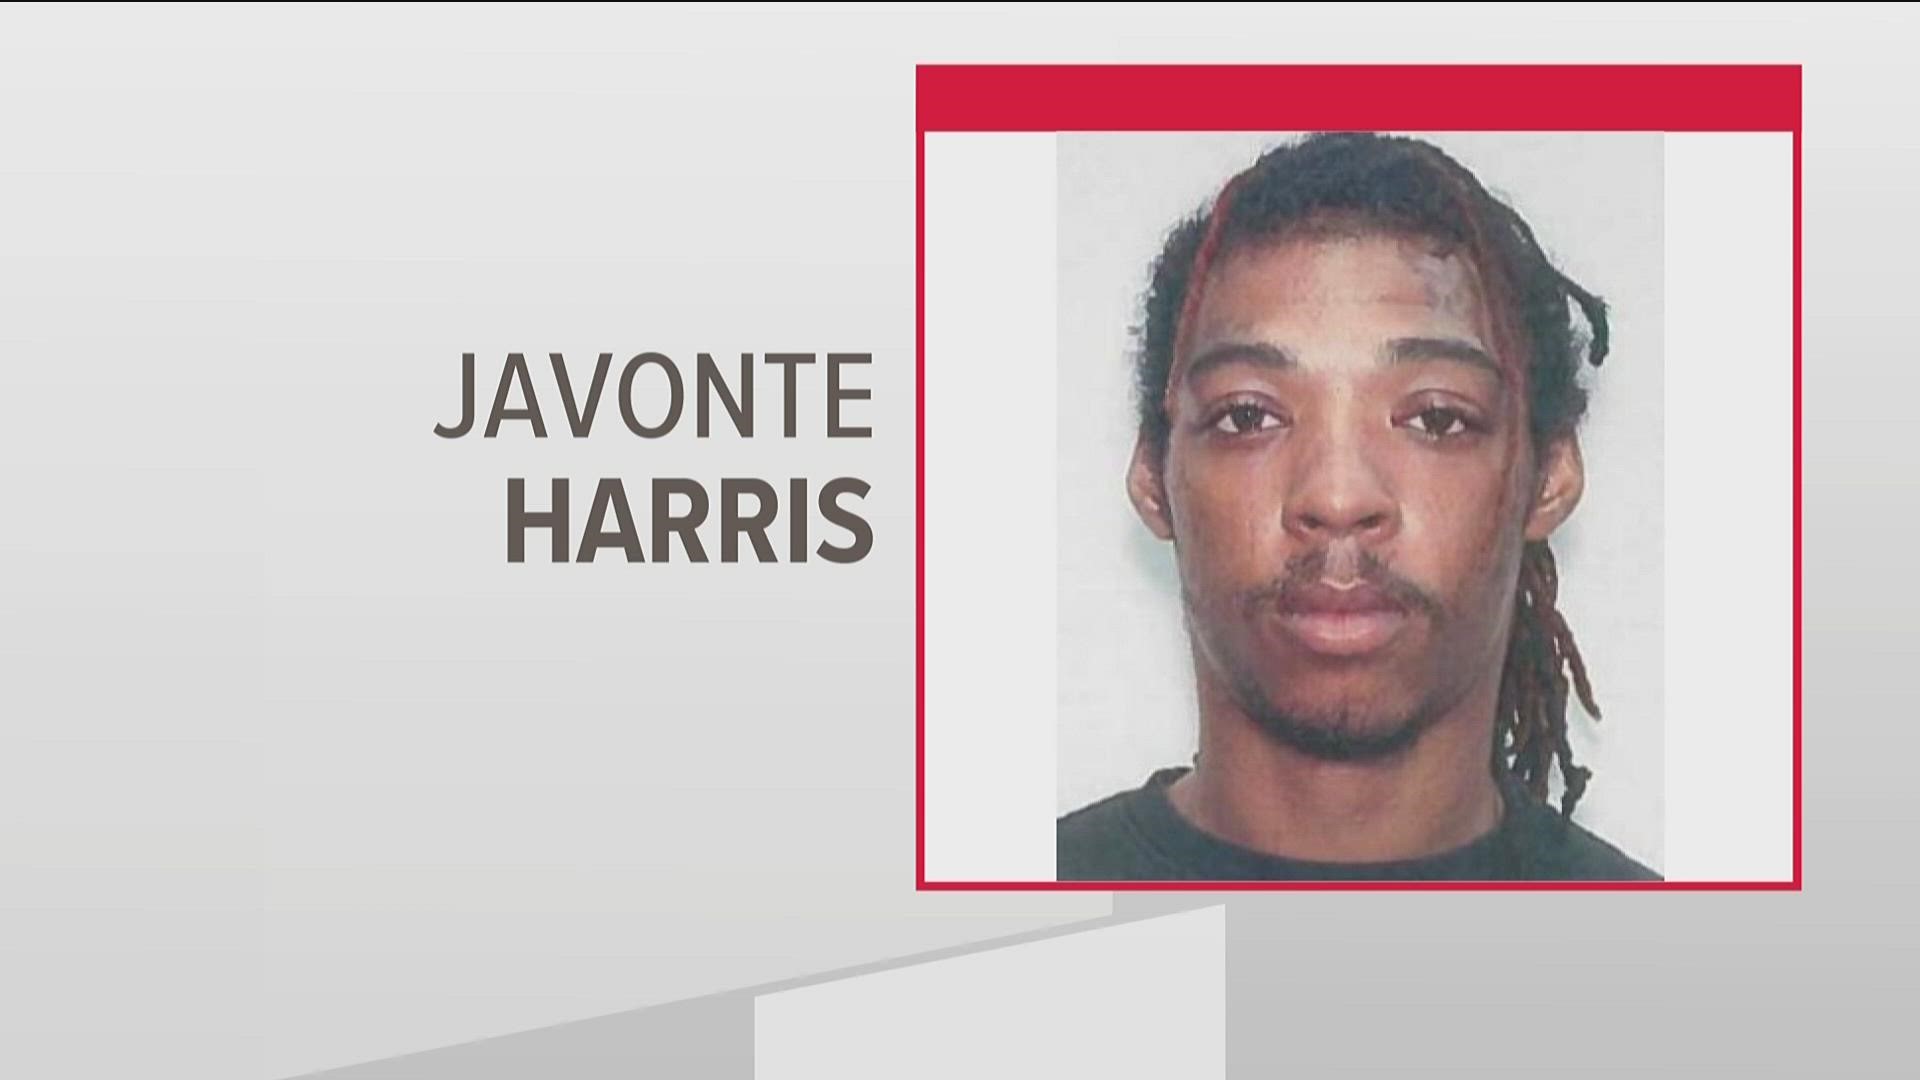 Police need help finding Javonte Harris, who is wanted for cruelty to children and felony murder. The child's mother, Malisha Sasfras, was arrested earlier.